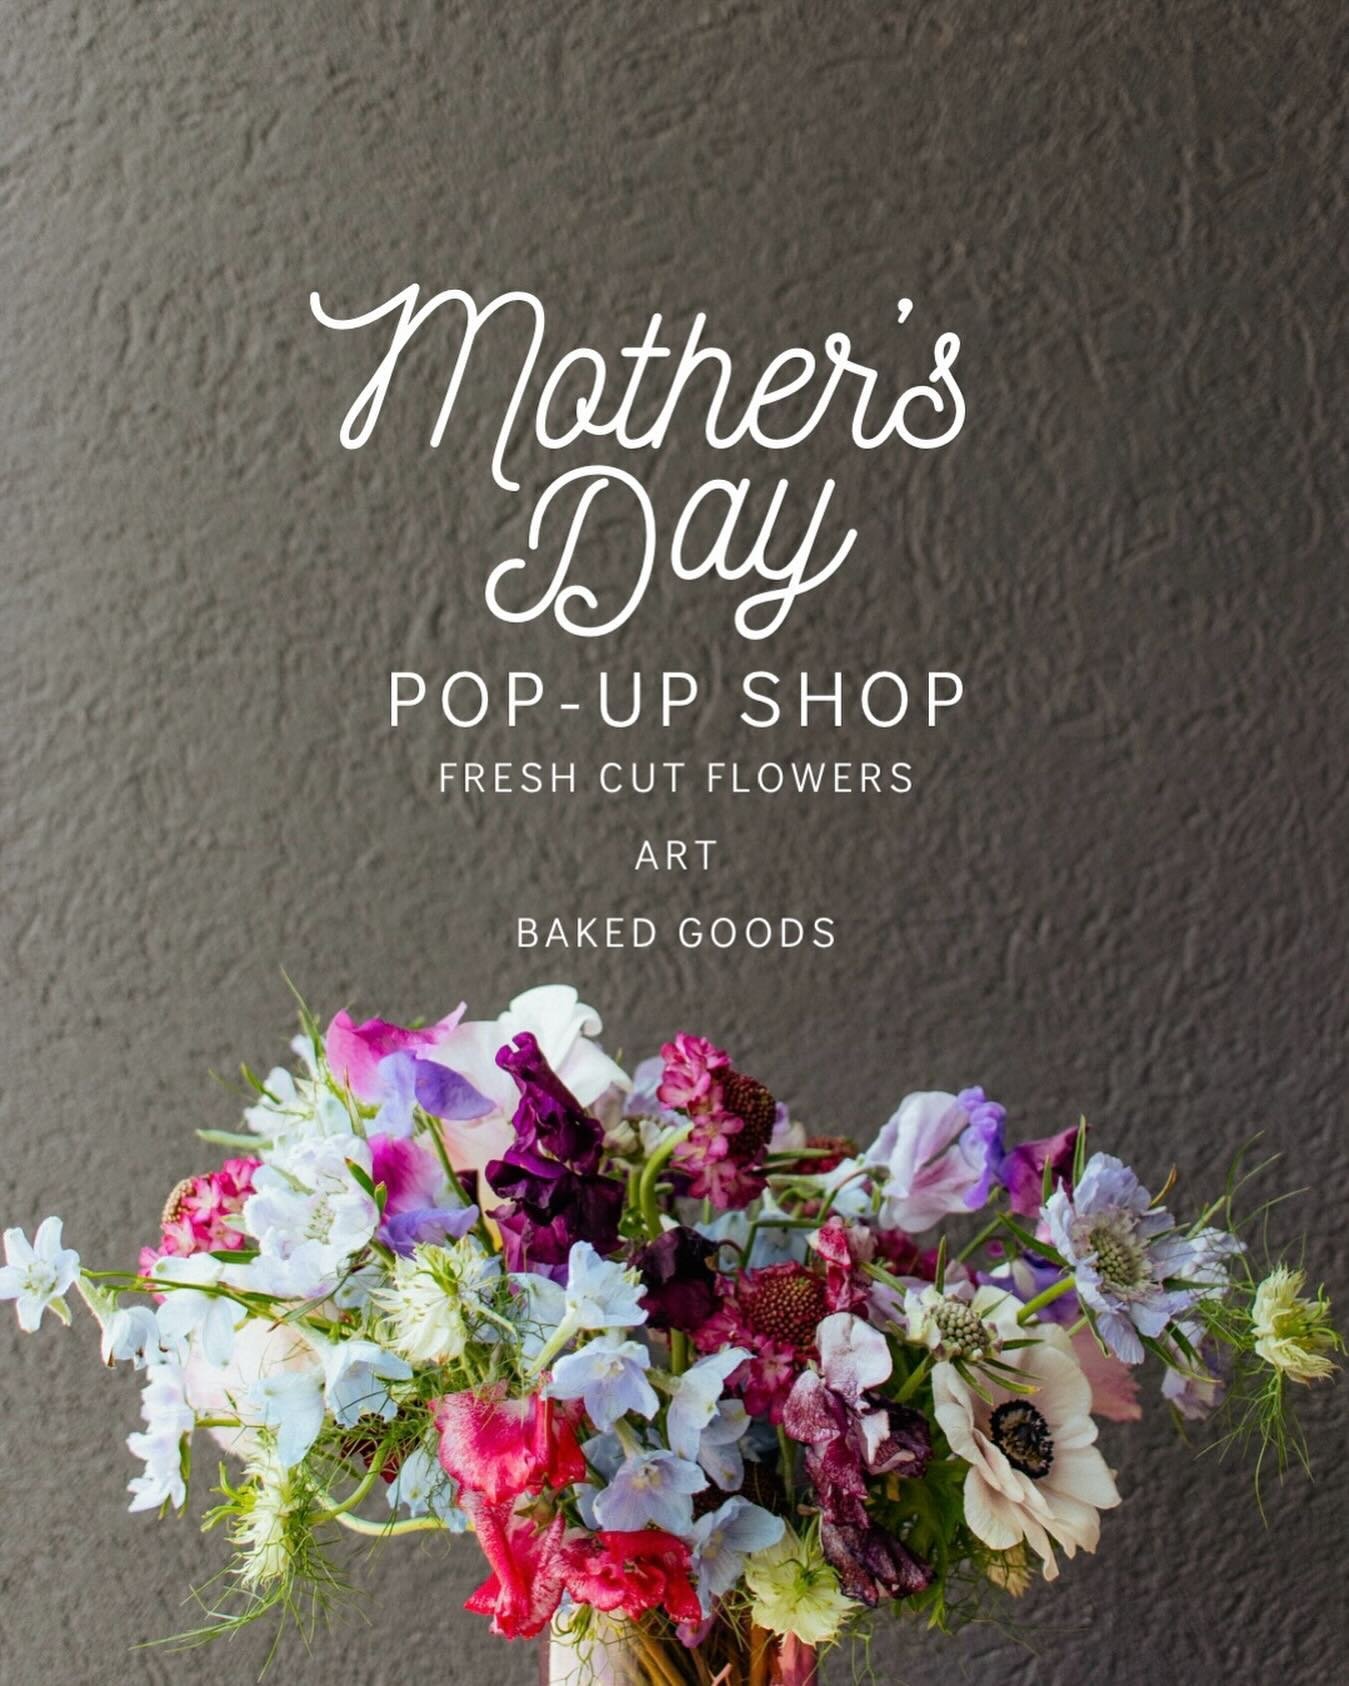 Saturday, May 11th from 10am-3pm!

Olentangy River Brewing Co. will hosting a Mother&rsquo;s Day pop-up shop featuring
&bull; Build-your-own bouquets (with our own lovely @handeluune)
&bull; Original art, prints, cards, paintings by @amos_art1
&bull;